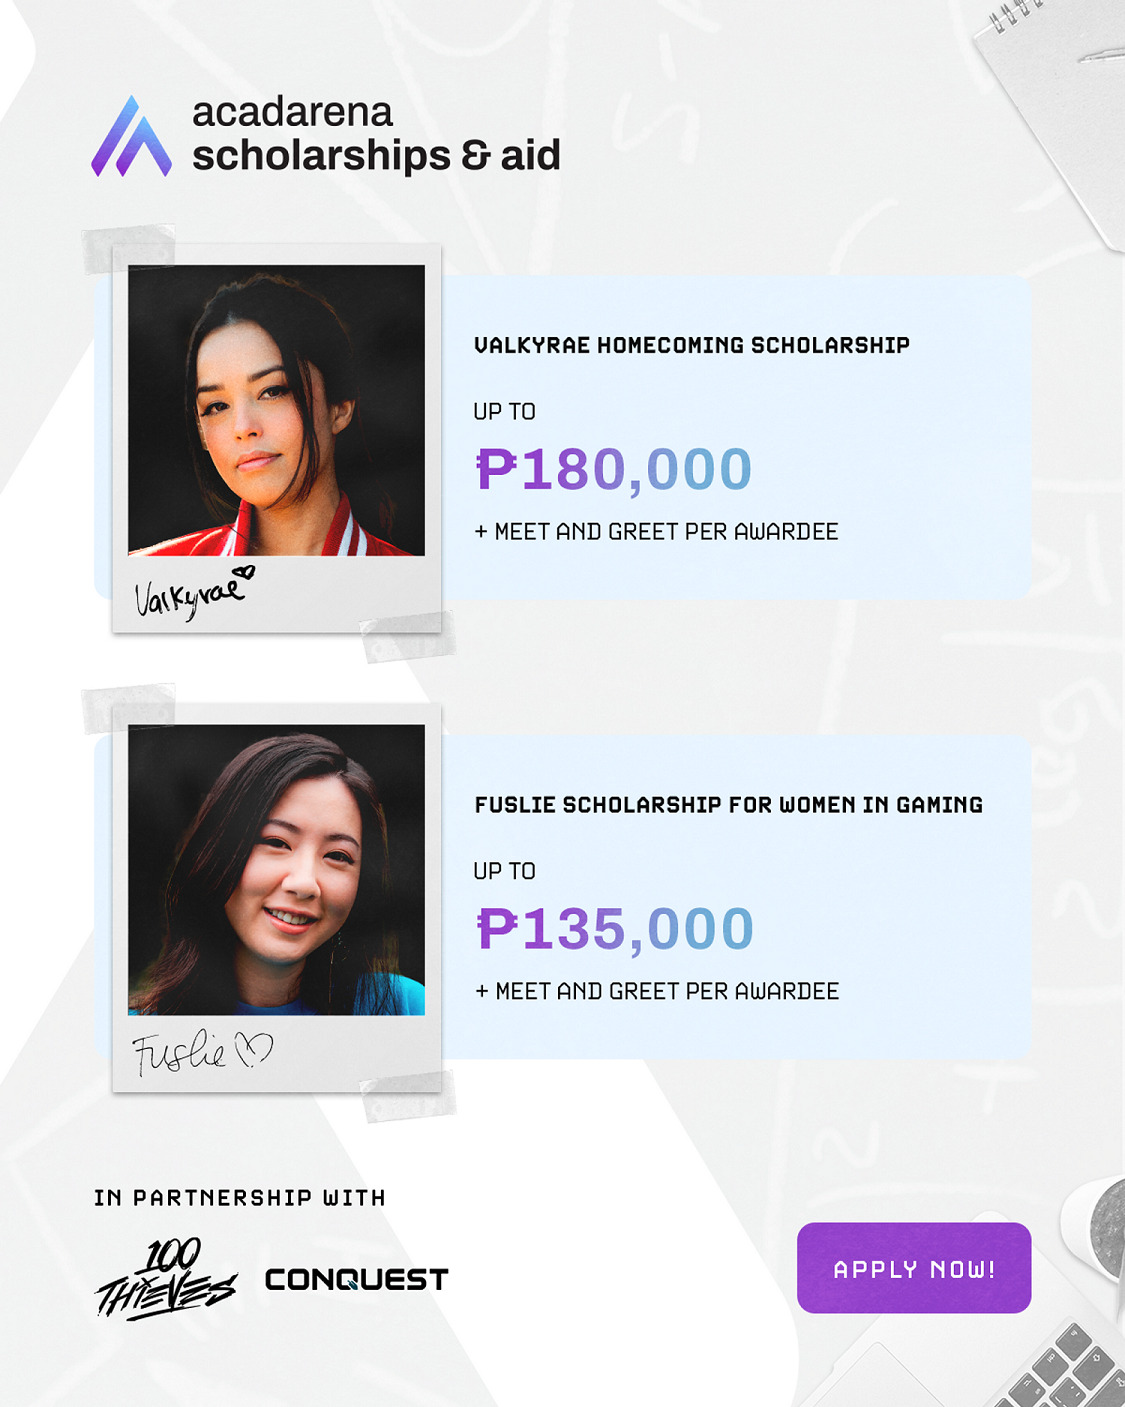 AcadArena Partners with 100 Thieves to Provide Scholarships to Filipino Students - returnal